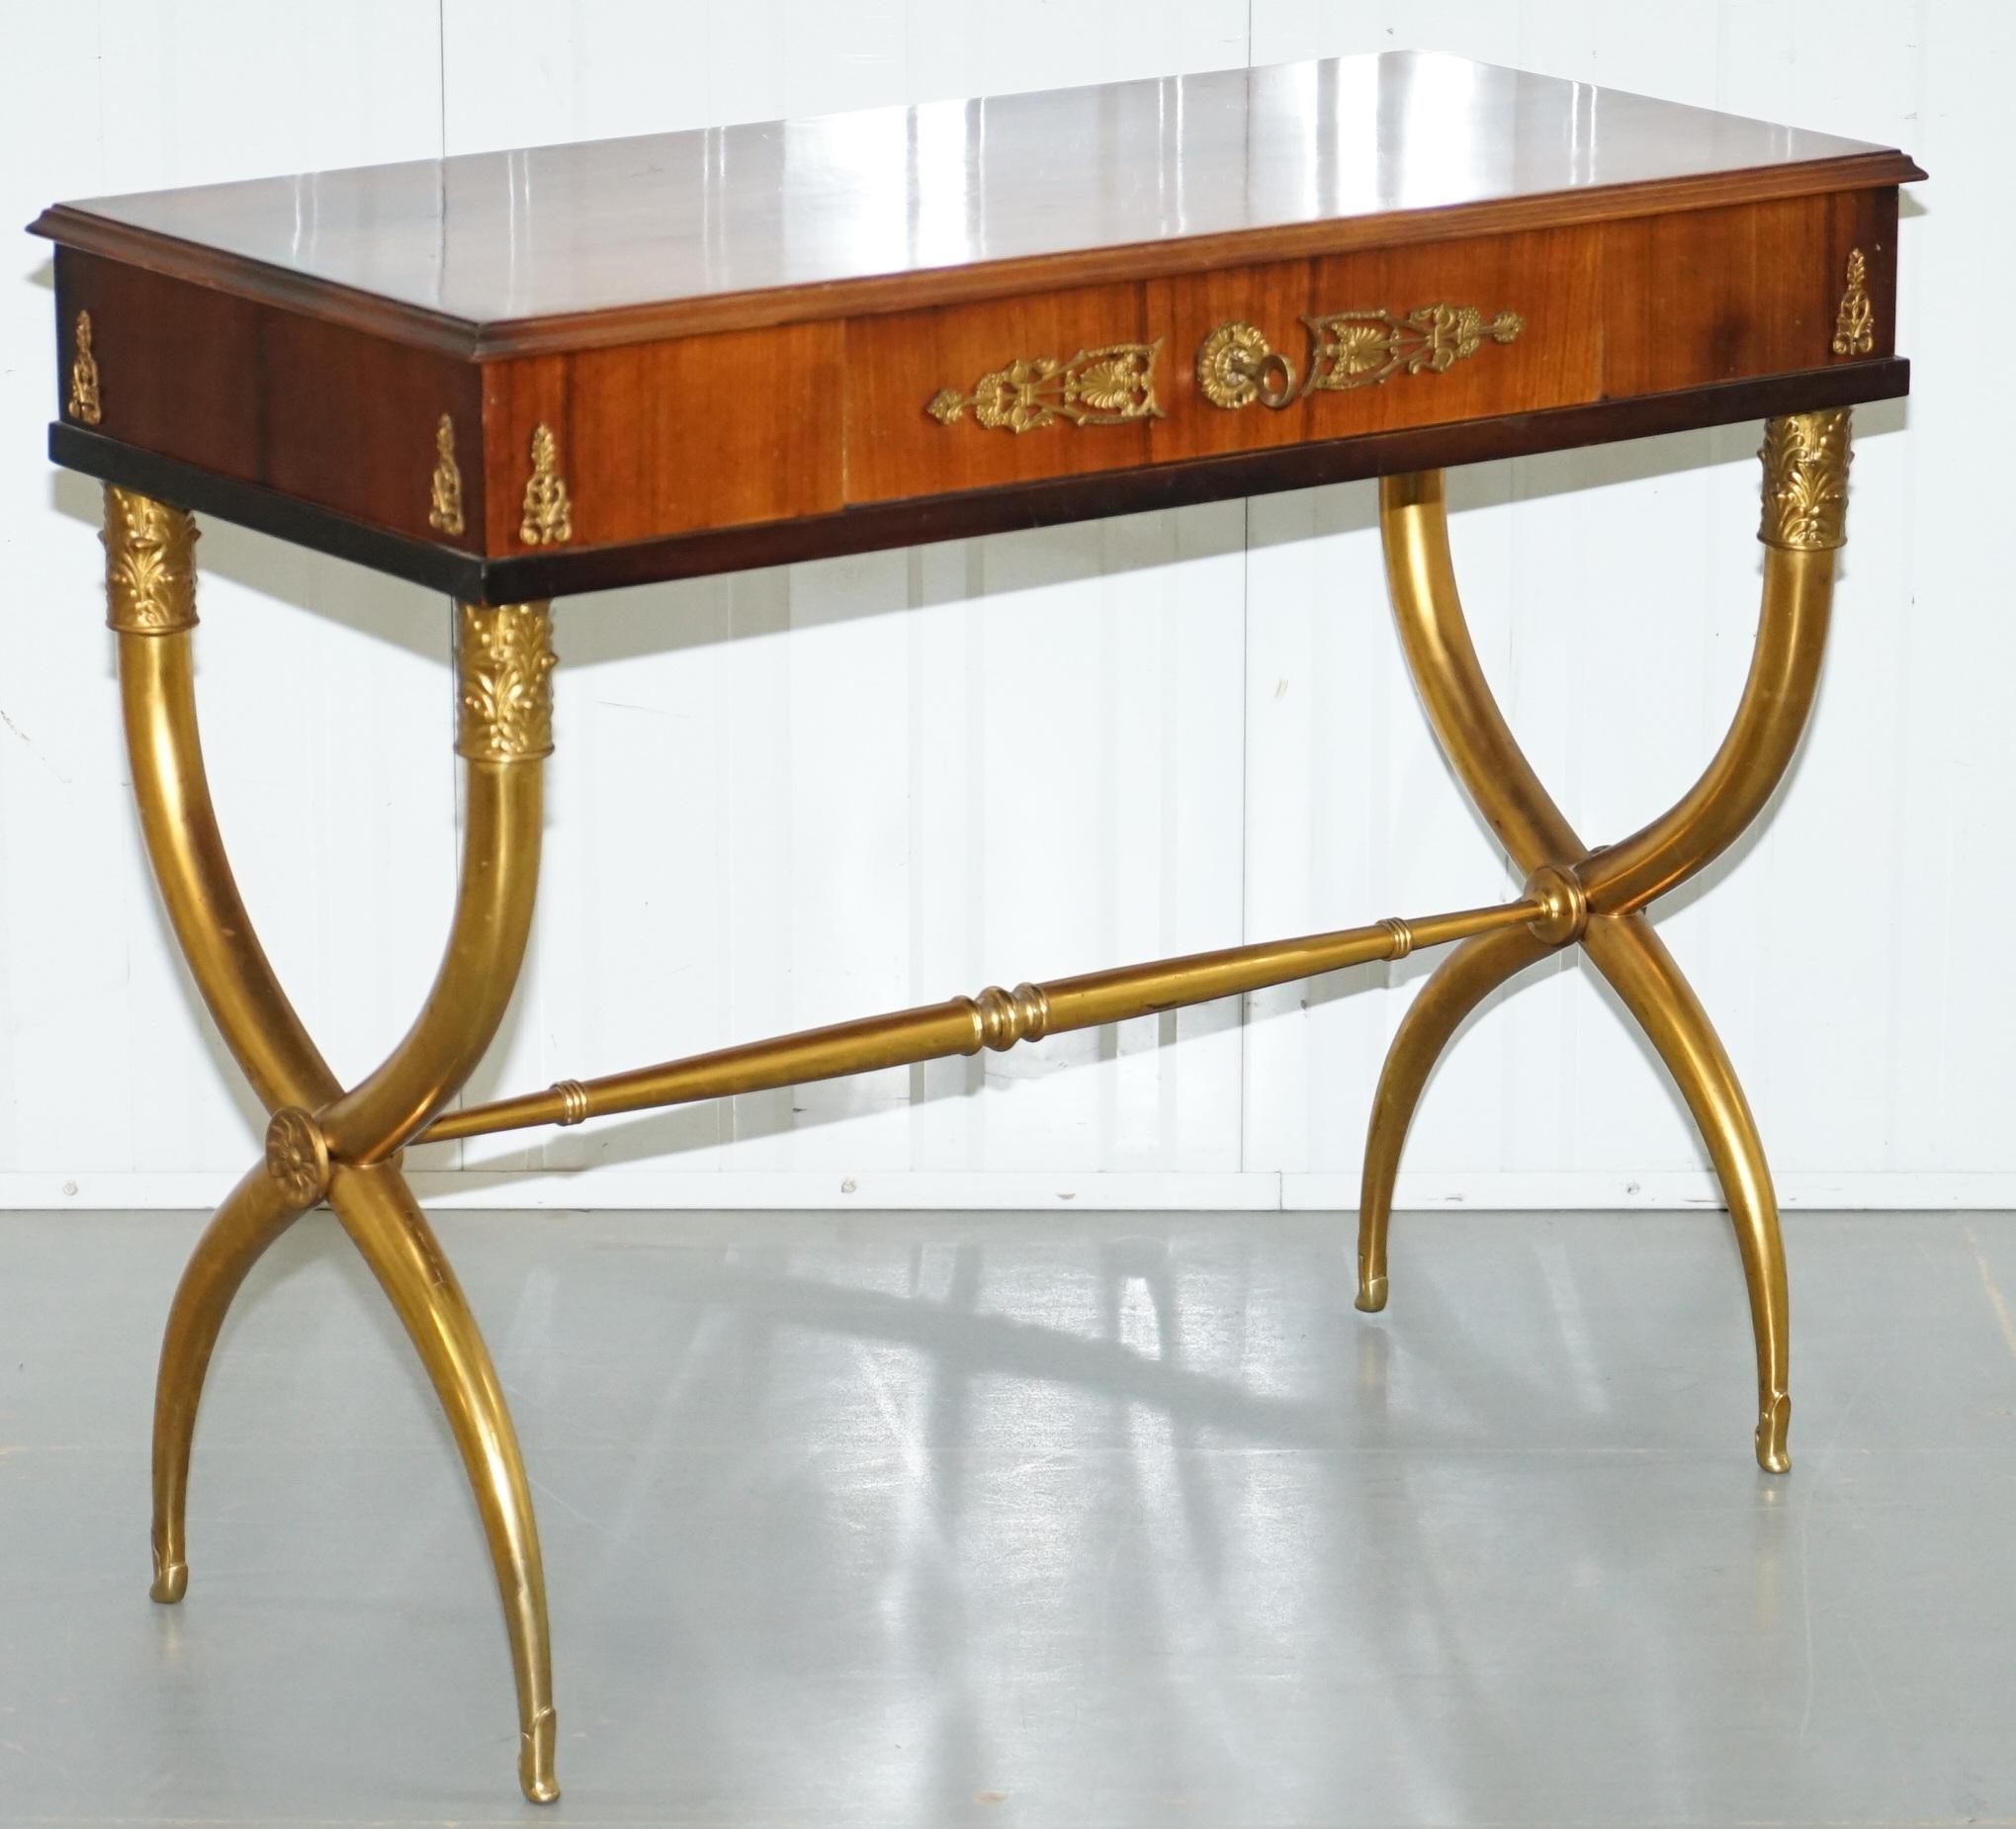 We are delighted to offer for sale this vintage Regency neoclassical style console table with brass legs and mounts

Wonderfully ornate with elegant lines, the legs scream Regency decadence but naturally, it’s a neoclassical style

Most likely